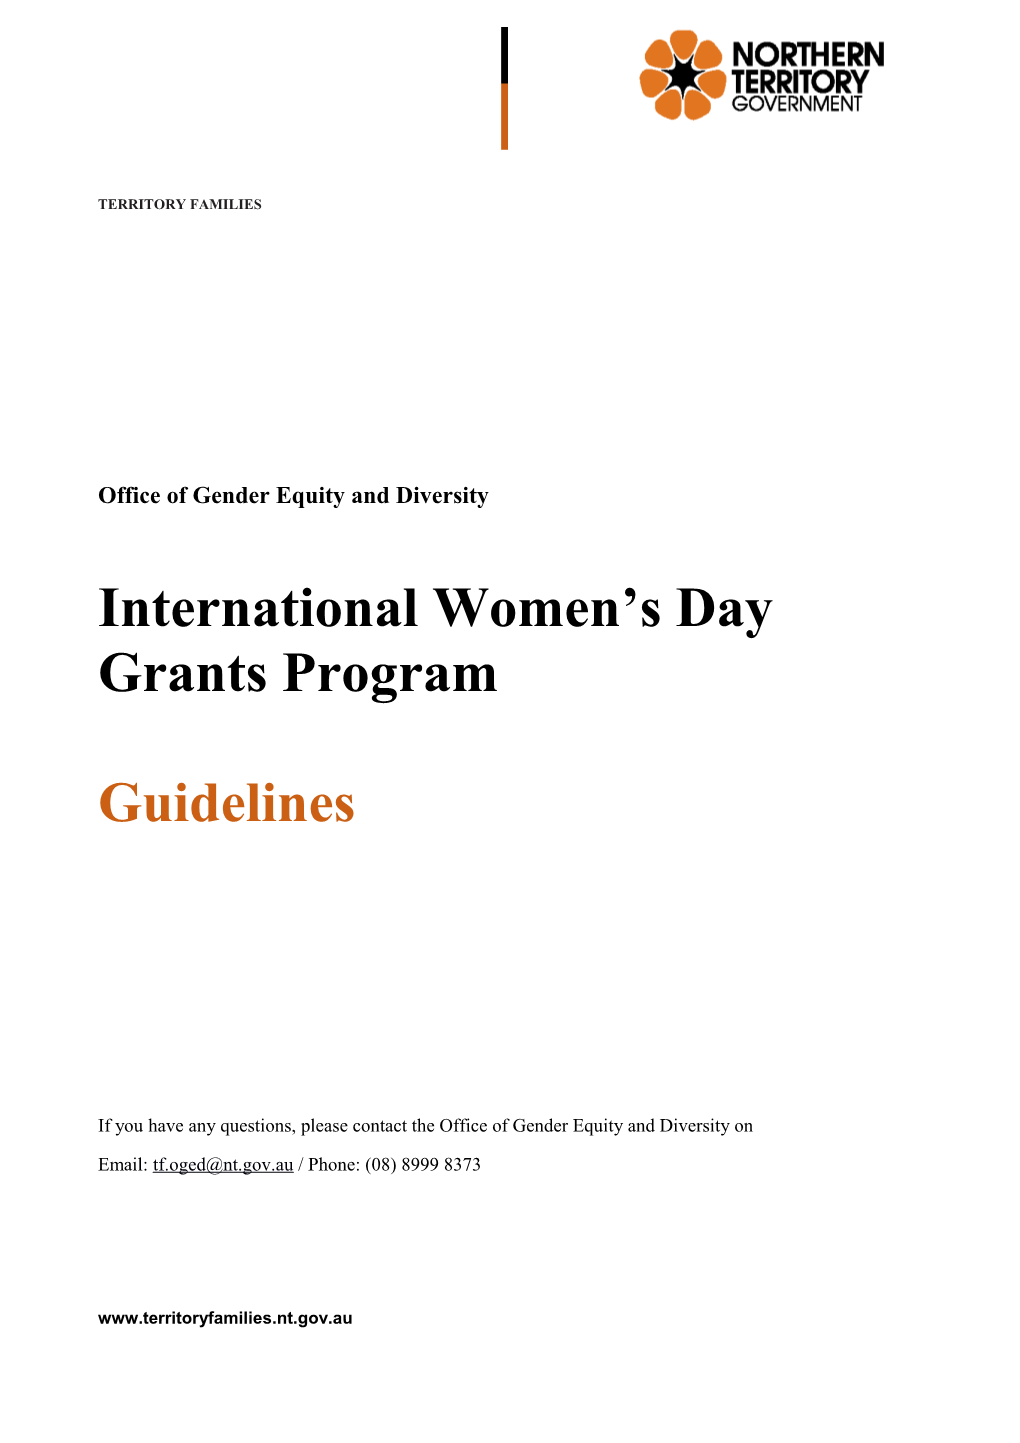 Office of Gender Equity and Diversity Gender Equality Grants - Guidelines